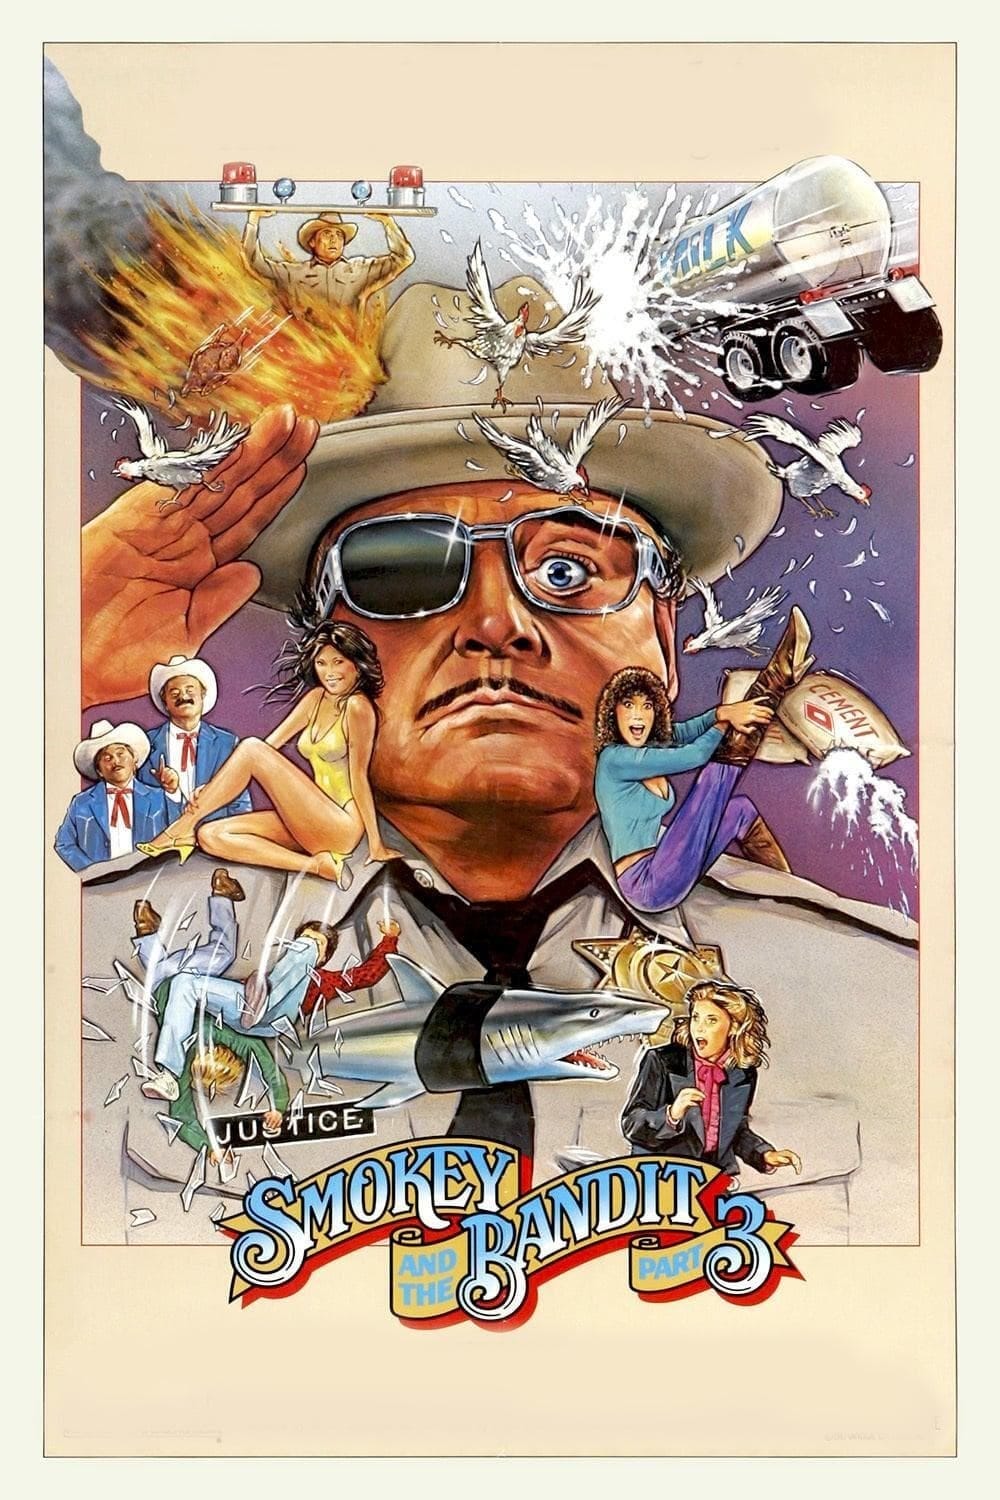 Smokey and the Bandit Part 3 (1983) | Poster